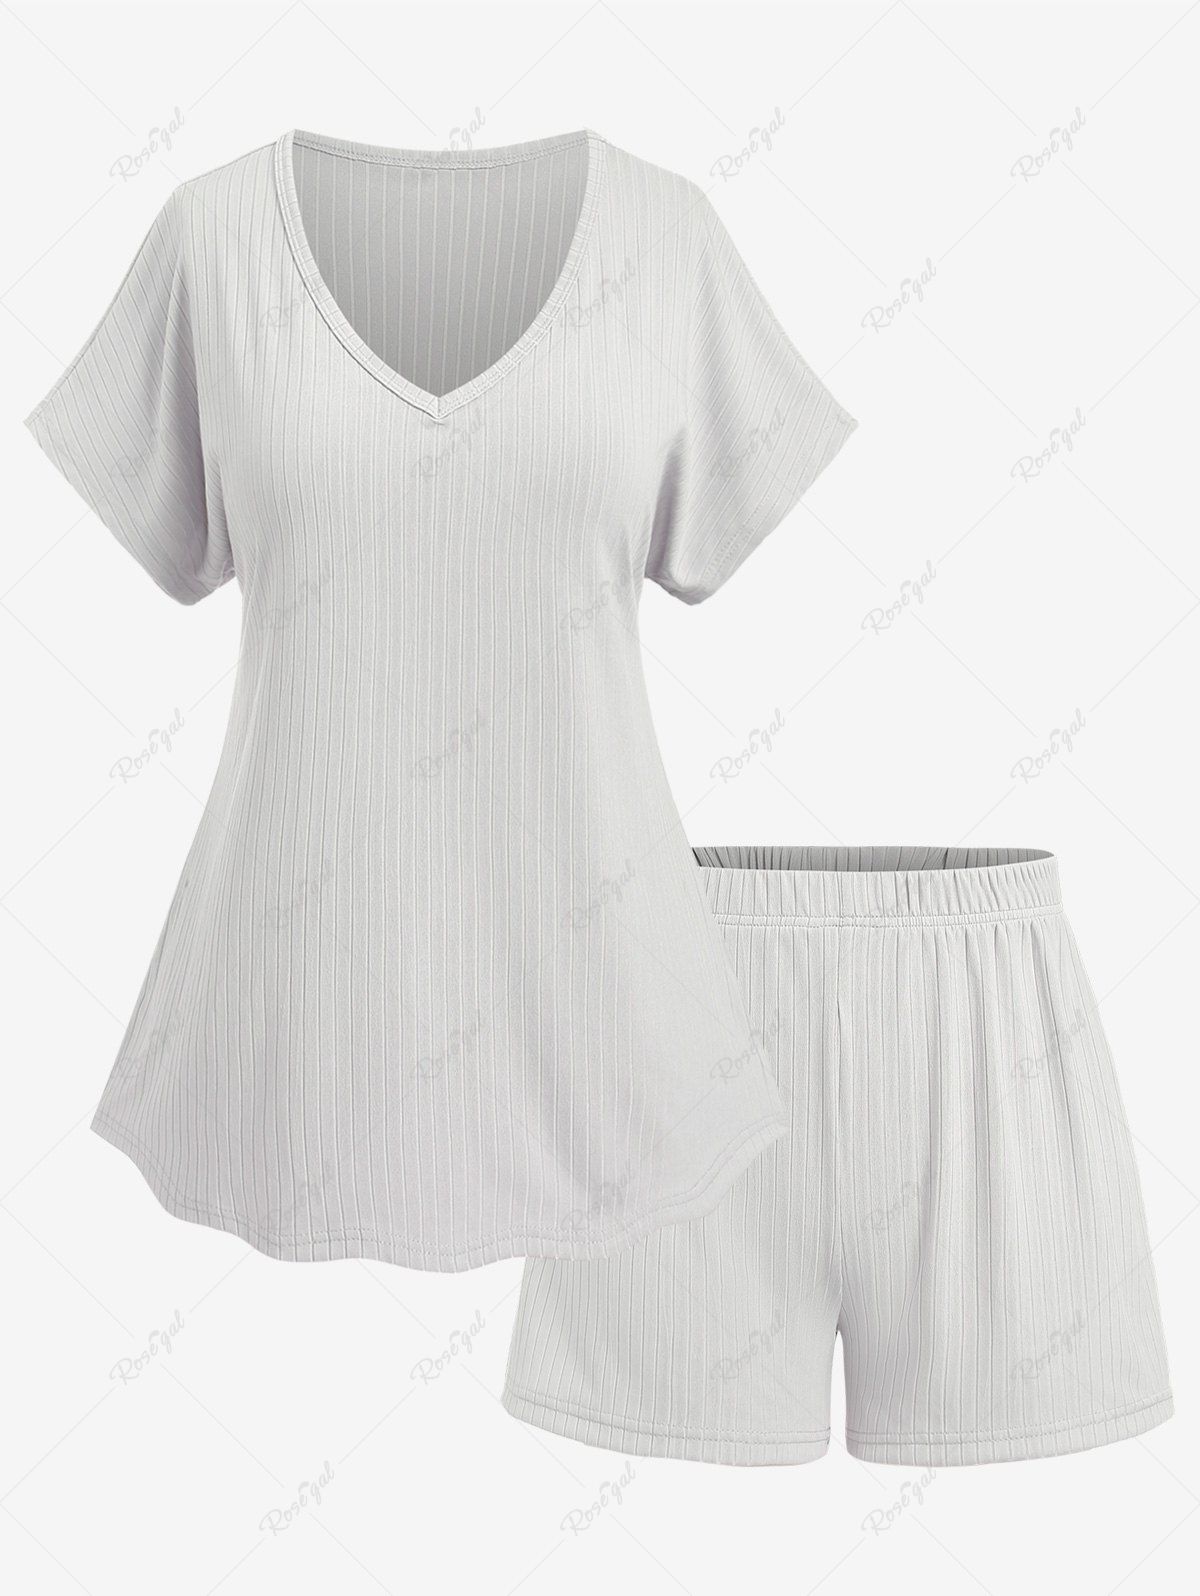 Chic Plus Size V Neck Solid Color Top and Shorts Pajamas Set  